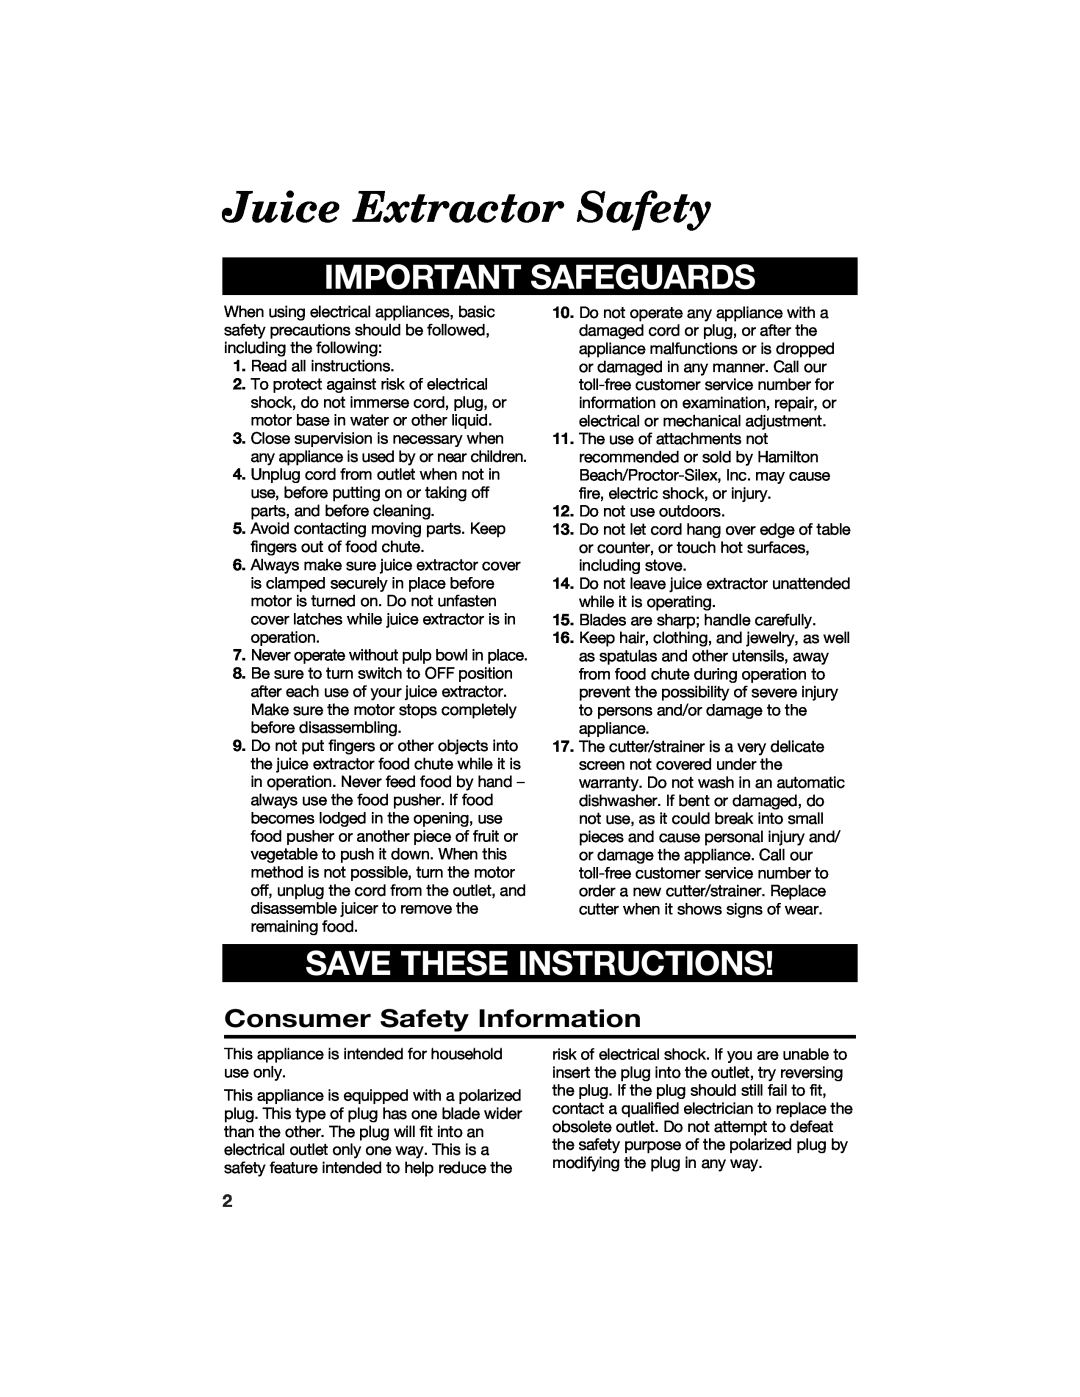 Hamilton Beach 67333 Juice Extractor Safety, Important Safeguards, Save These Instructions, Consumer Safety Information 